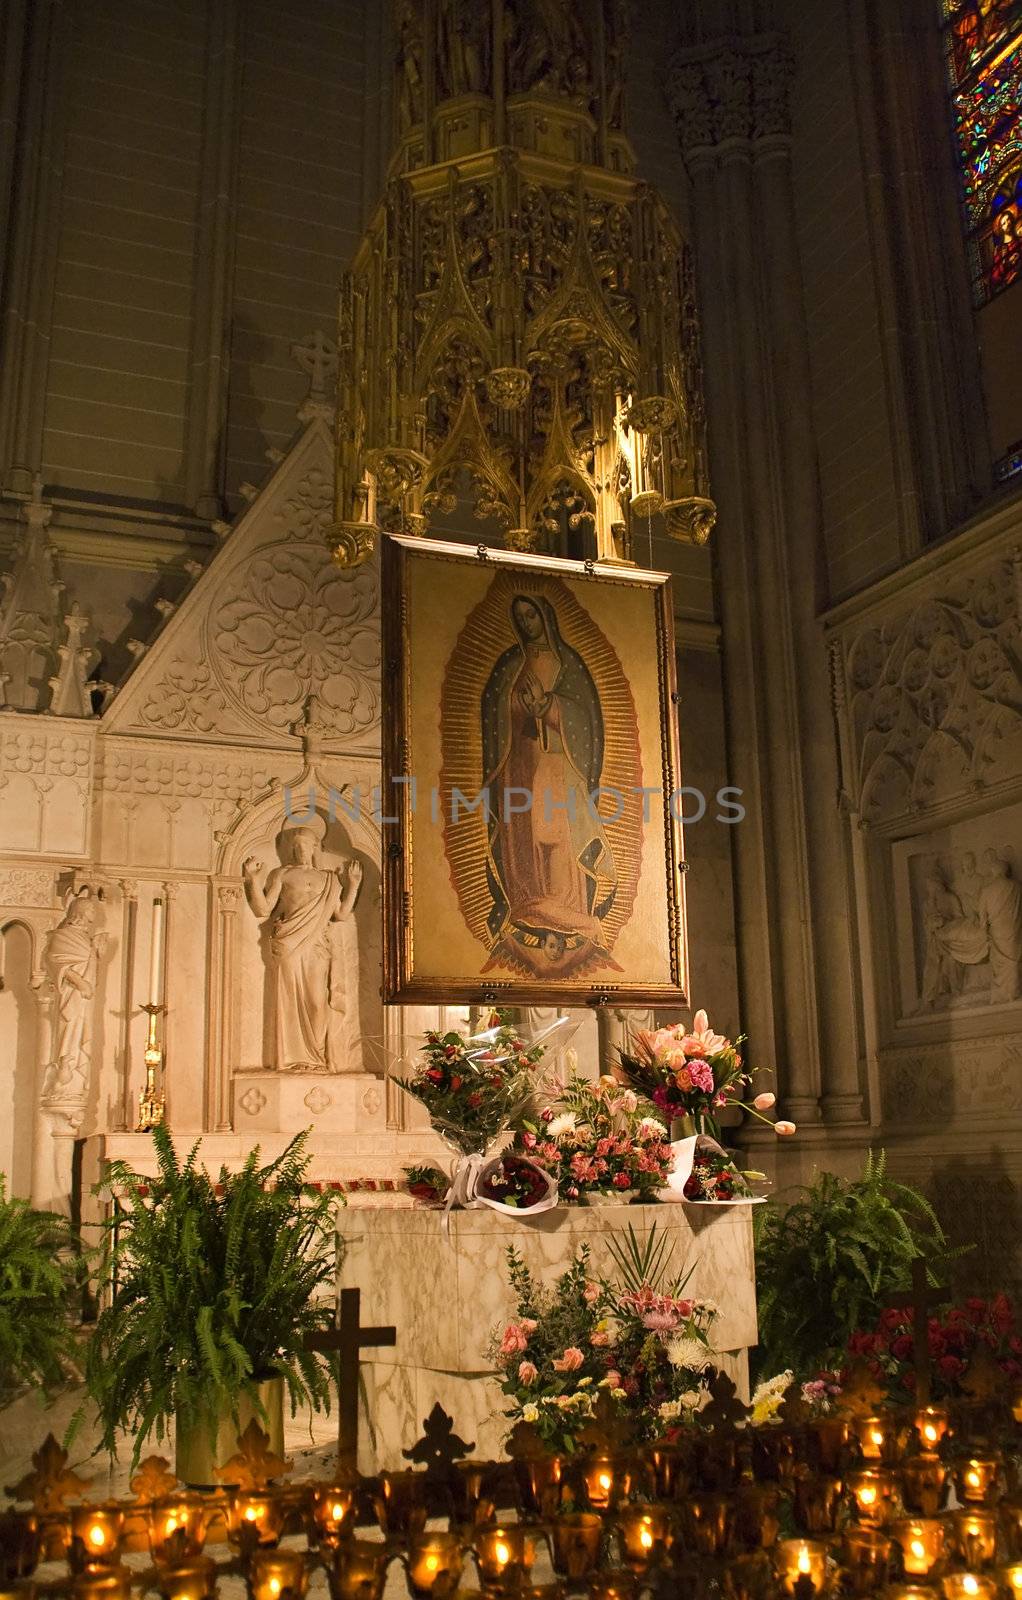 Guadalupe Shrine to Revelation in Mexico, Saint Patrick's Cathedral, New York City
No property release required as this is a copy of the guadalupe painting, which was revealed to the Peasant Juan Diego in Mexico in the 1500s.